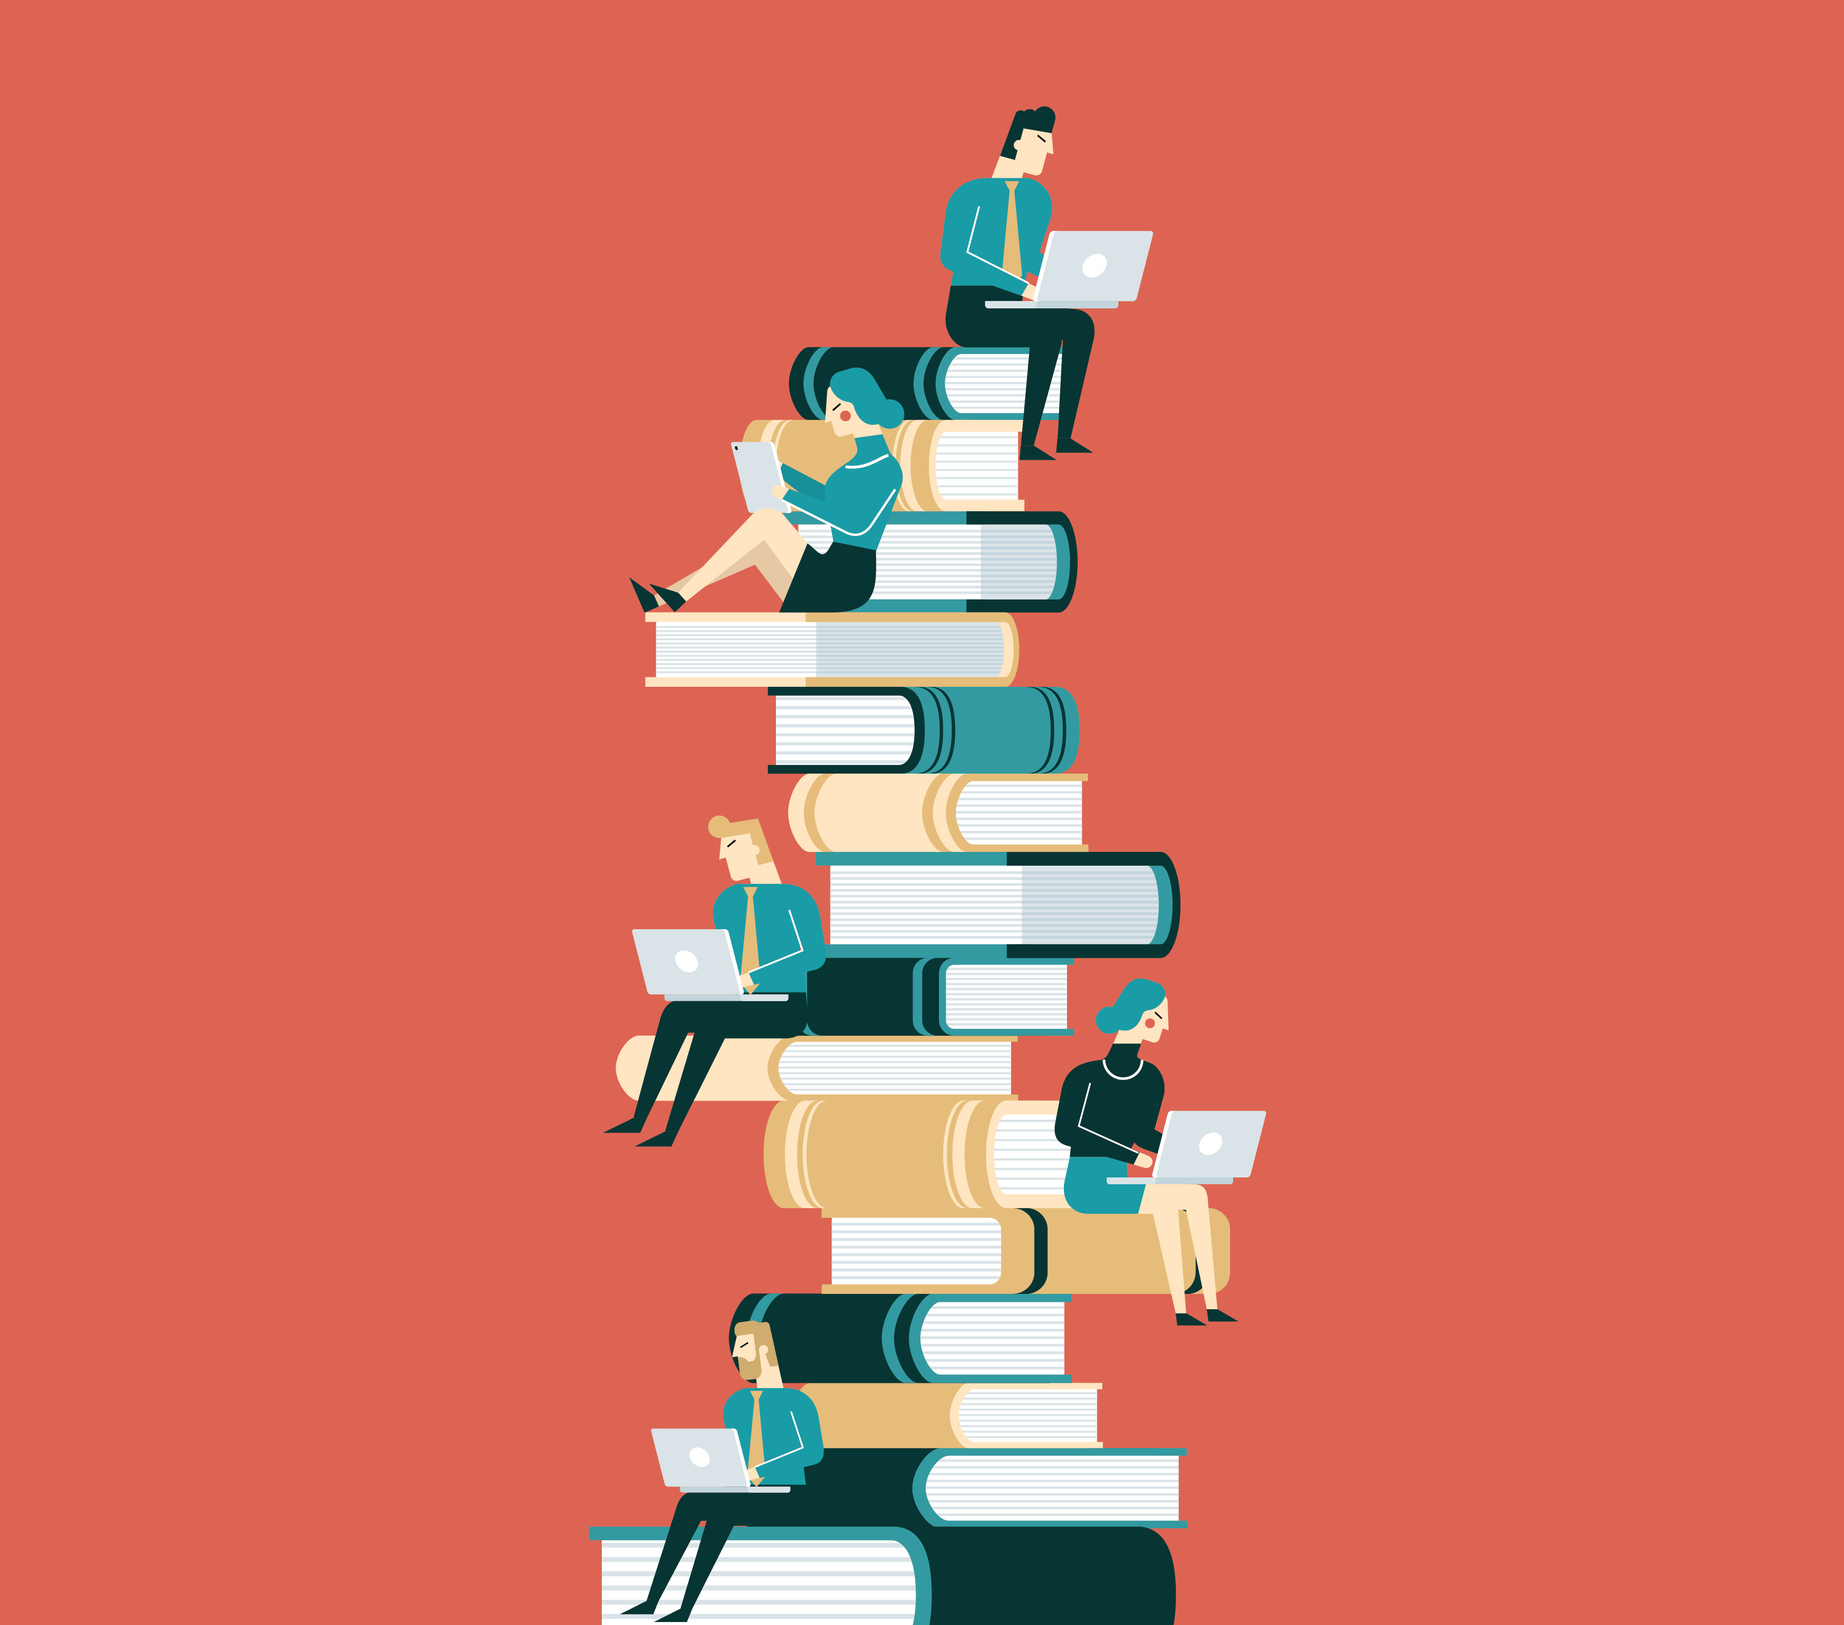 Business people sitting on books. Image credit: iStock